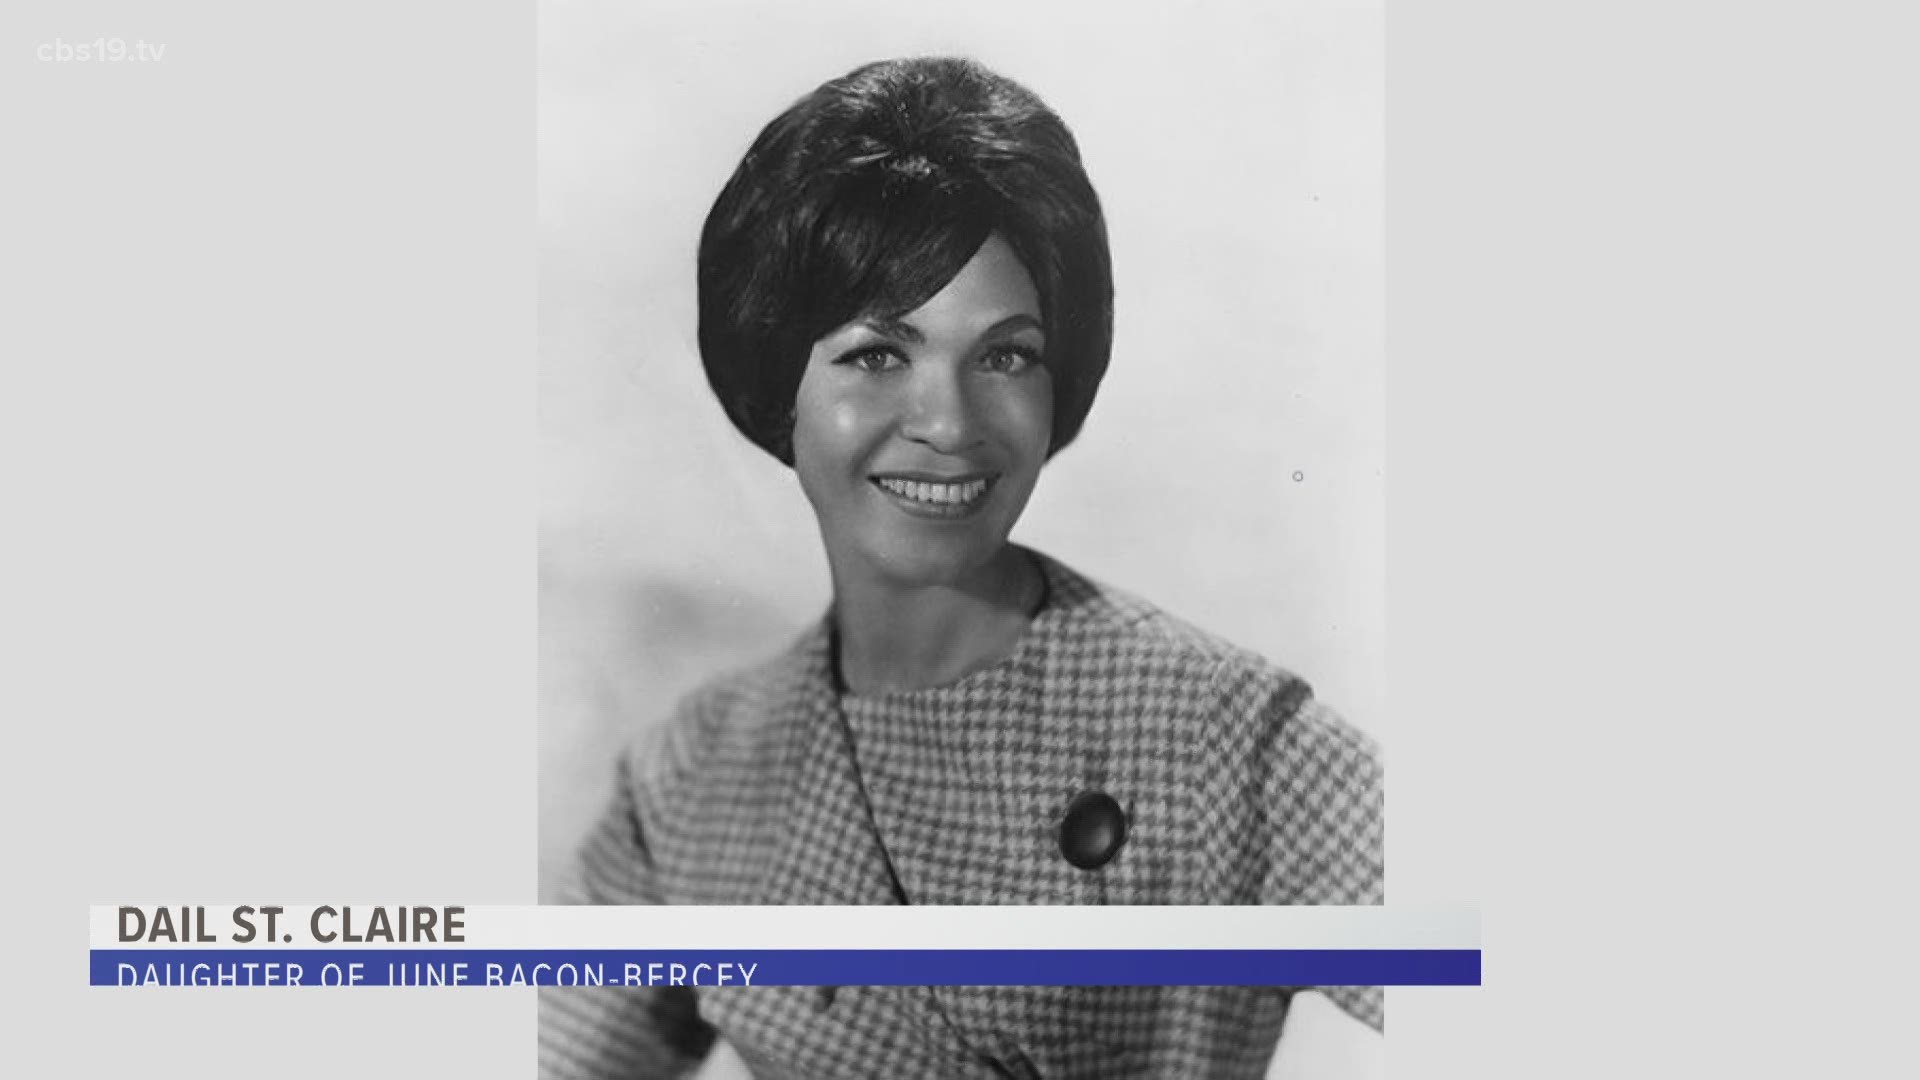 She was the first African-American woman to earn a degree in meteorology and the first female TV meteorologist.